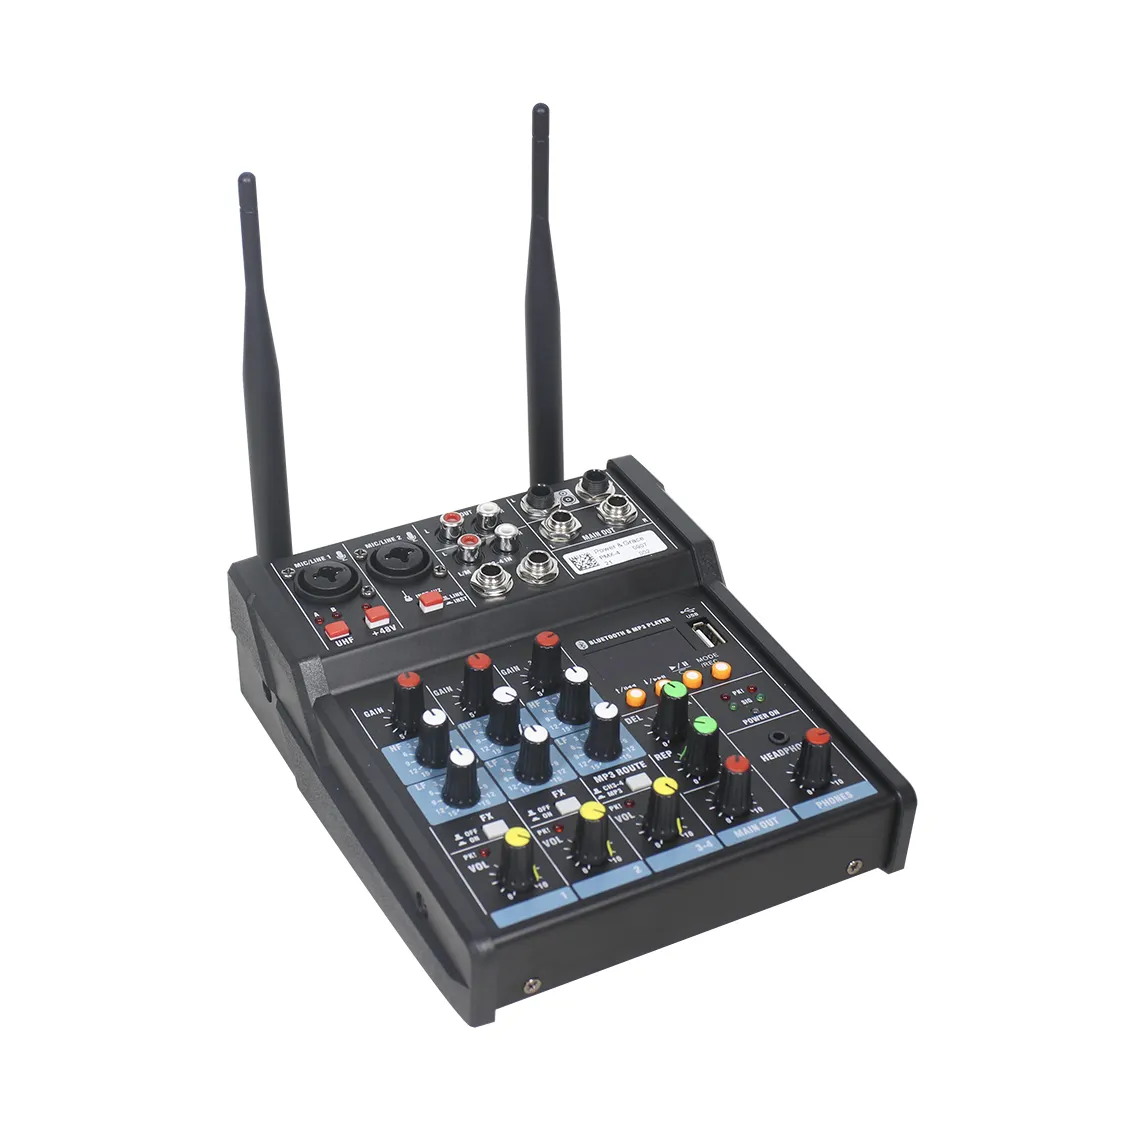 Professional Audio 4 Channels Bluetooth Built-in Amplifier Audio Mixer with 2 PCS Wireless Handheld Microphones